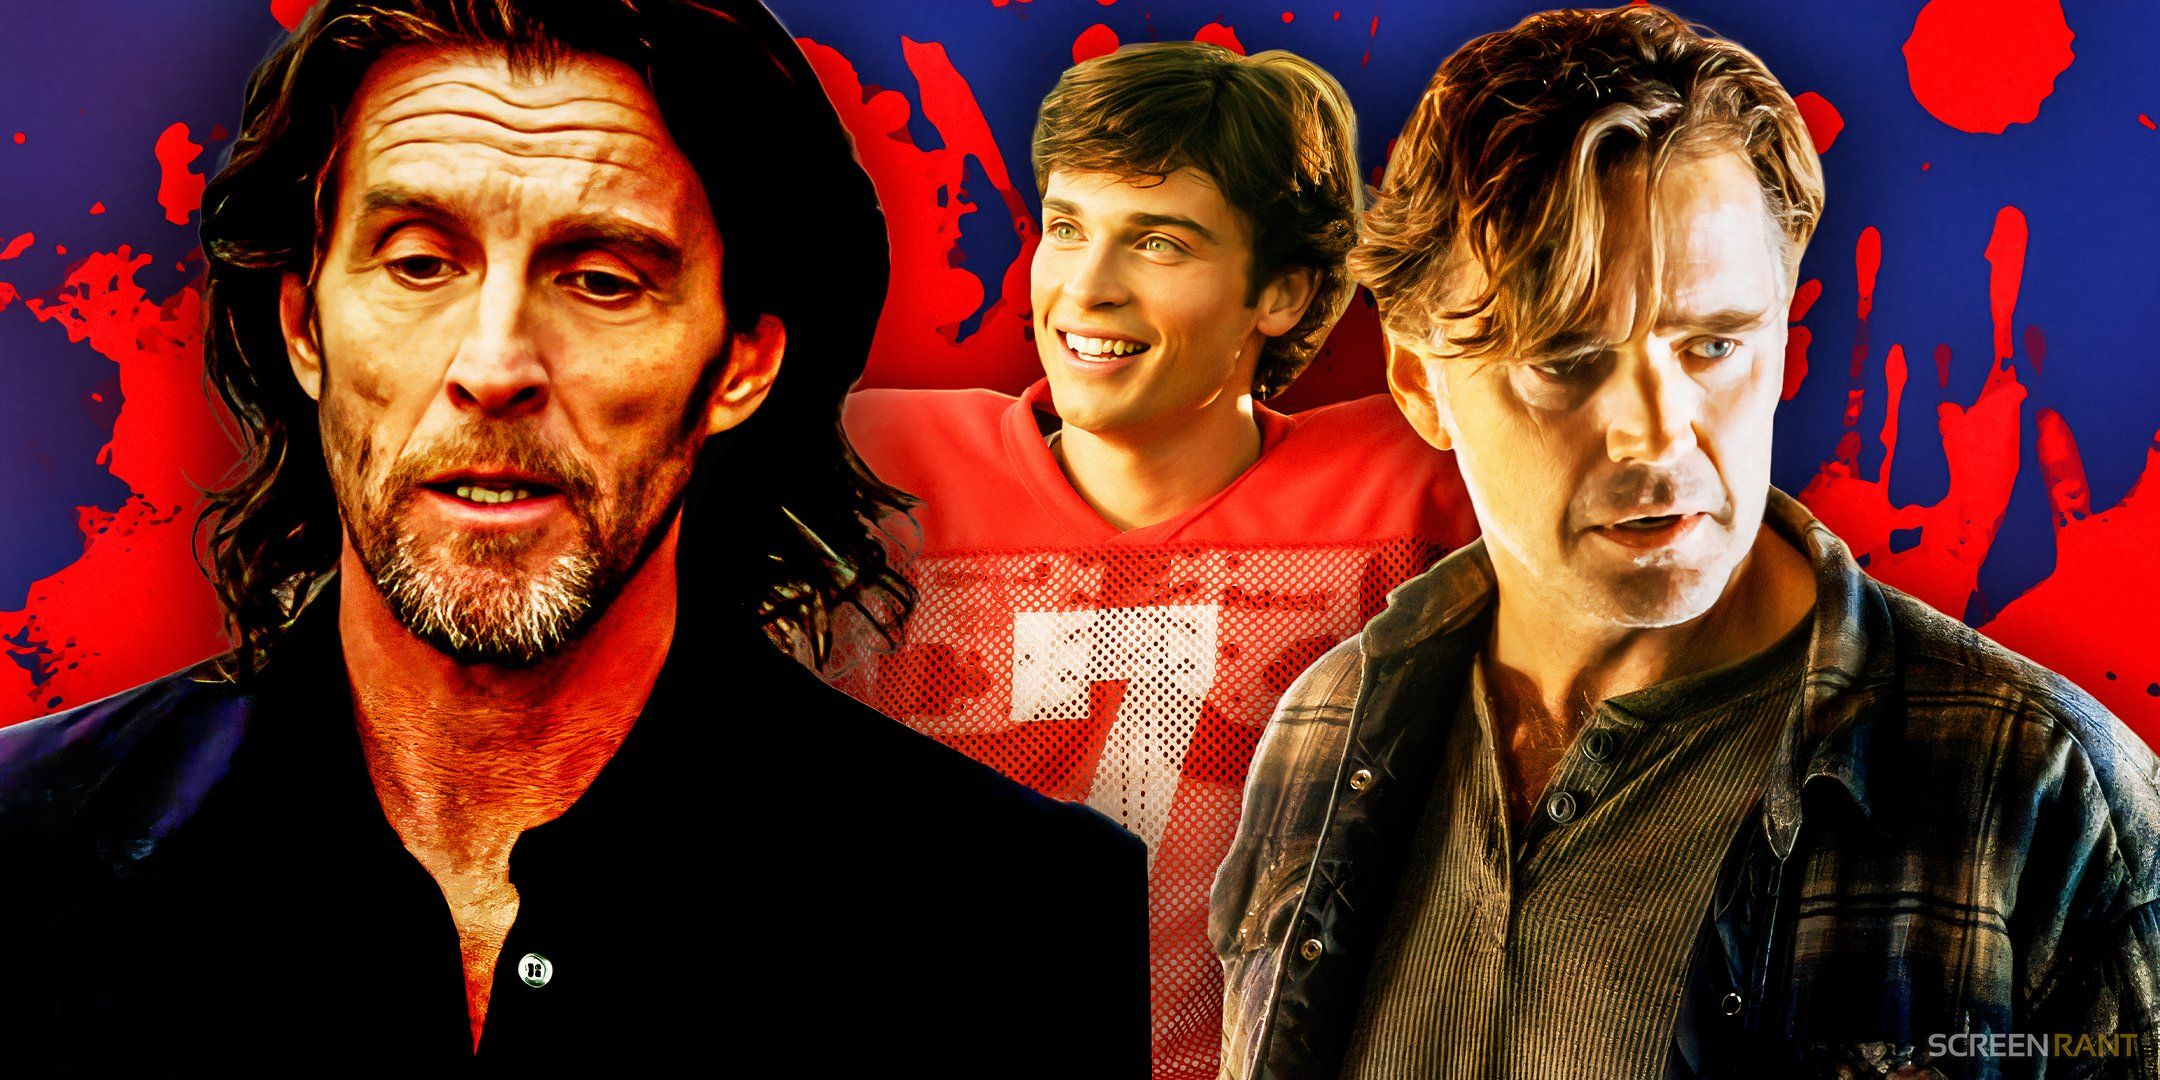 Lionel Luthor, Clark Kent, and Jonathan Kent in Smallville with a blood splatter background